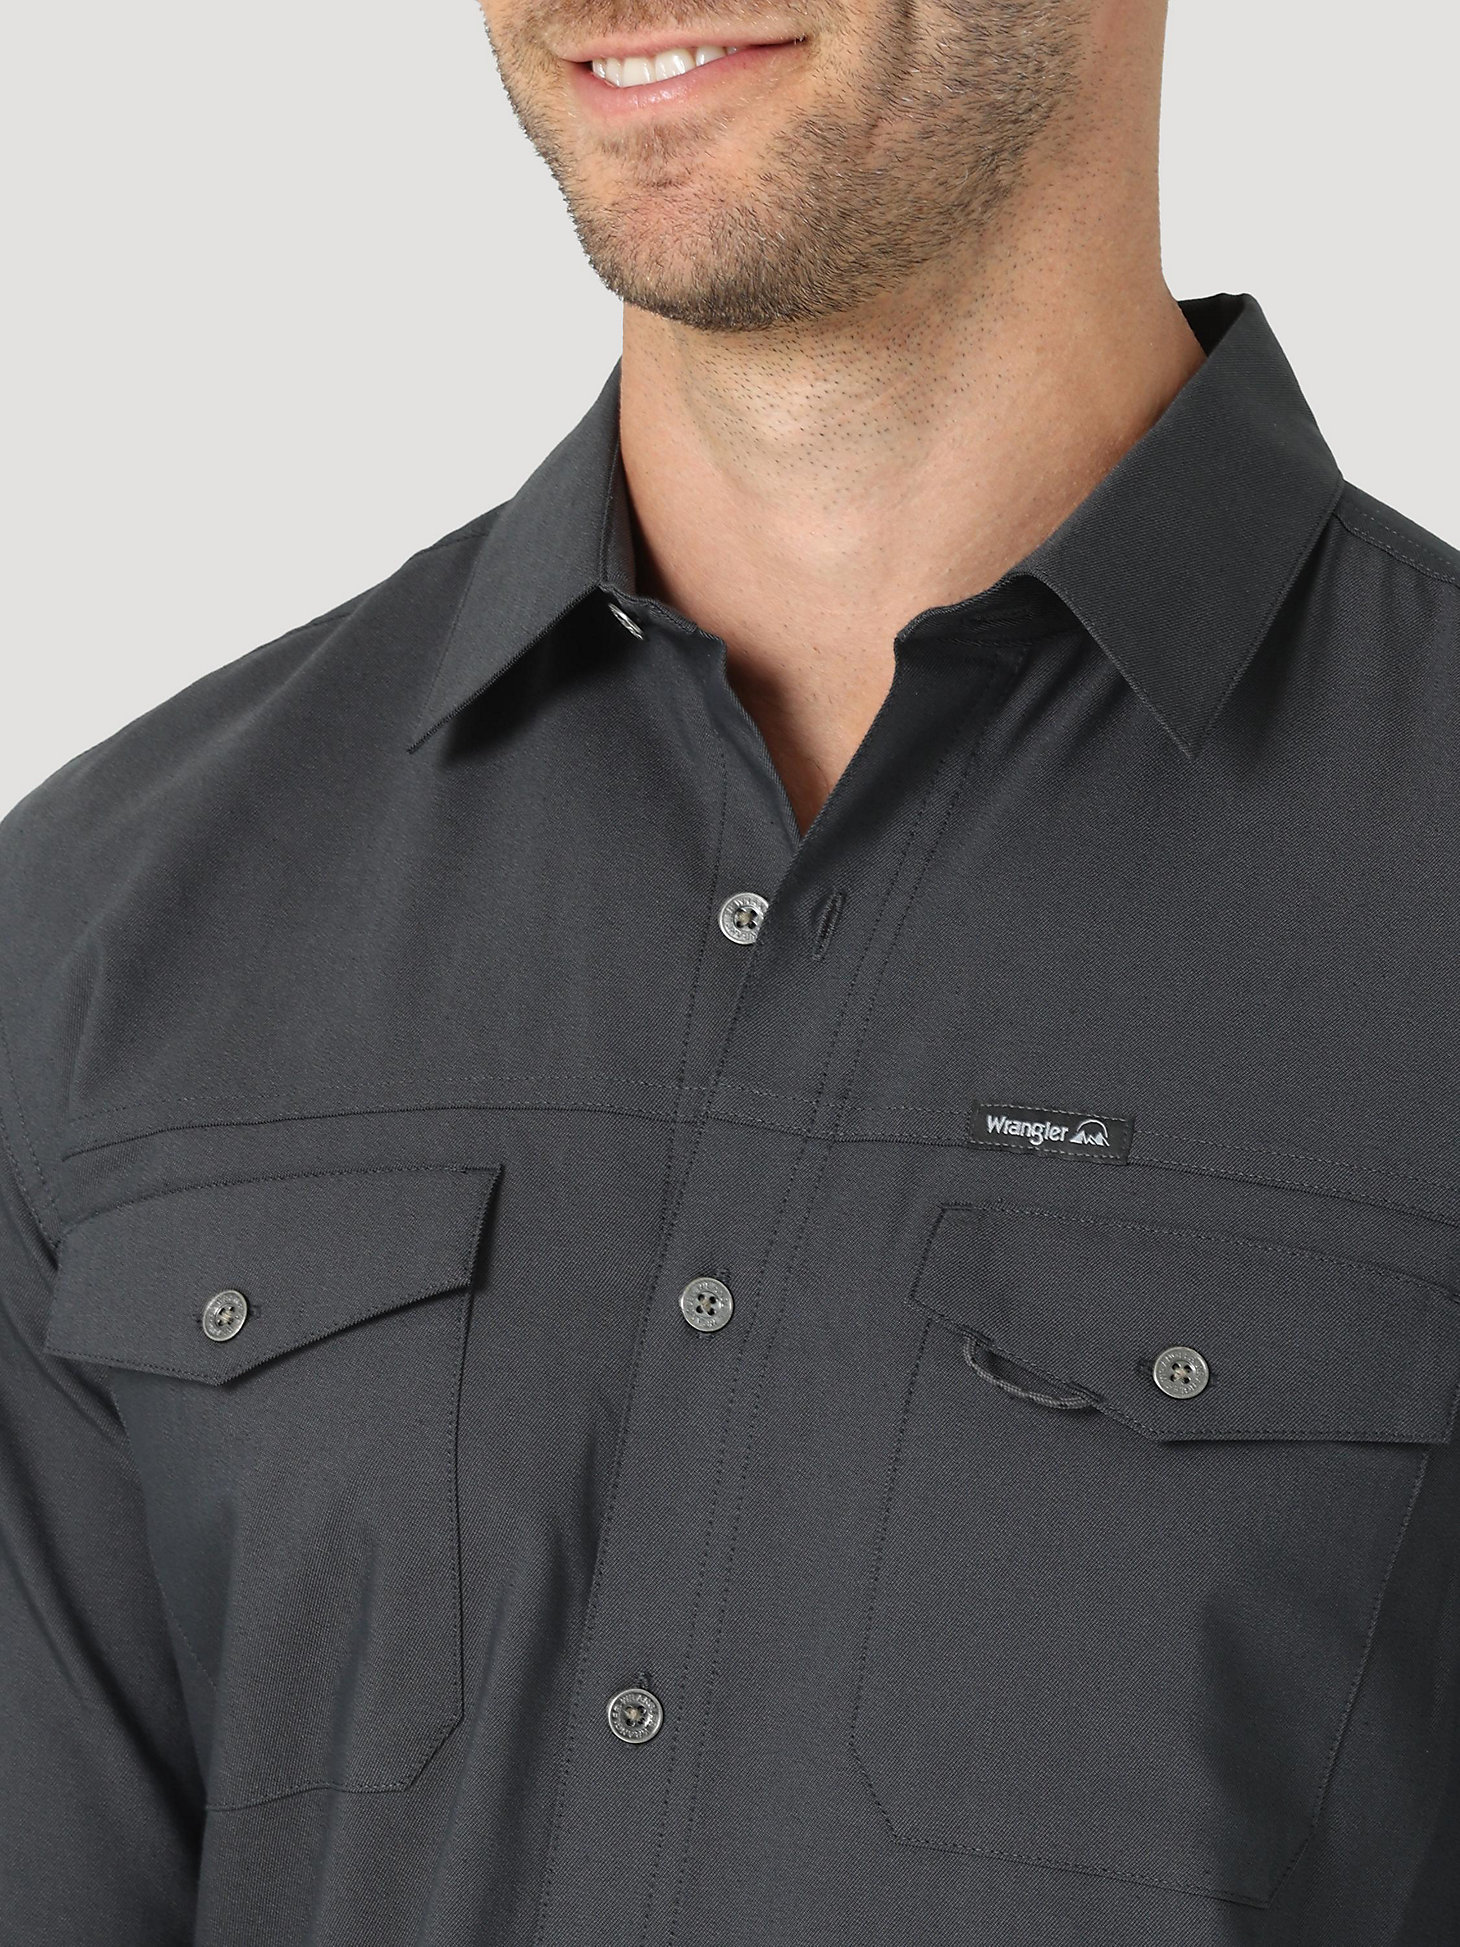 Men's Utility Outdoor Shirt in Anthracite alternative view 6